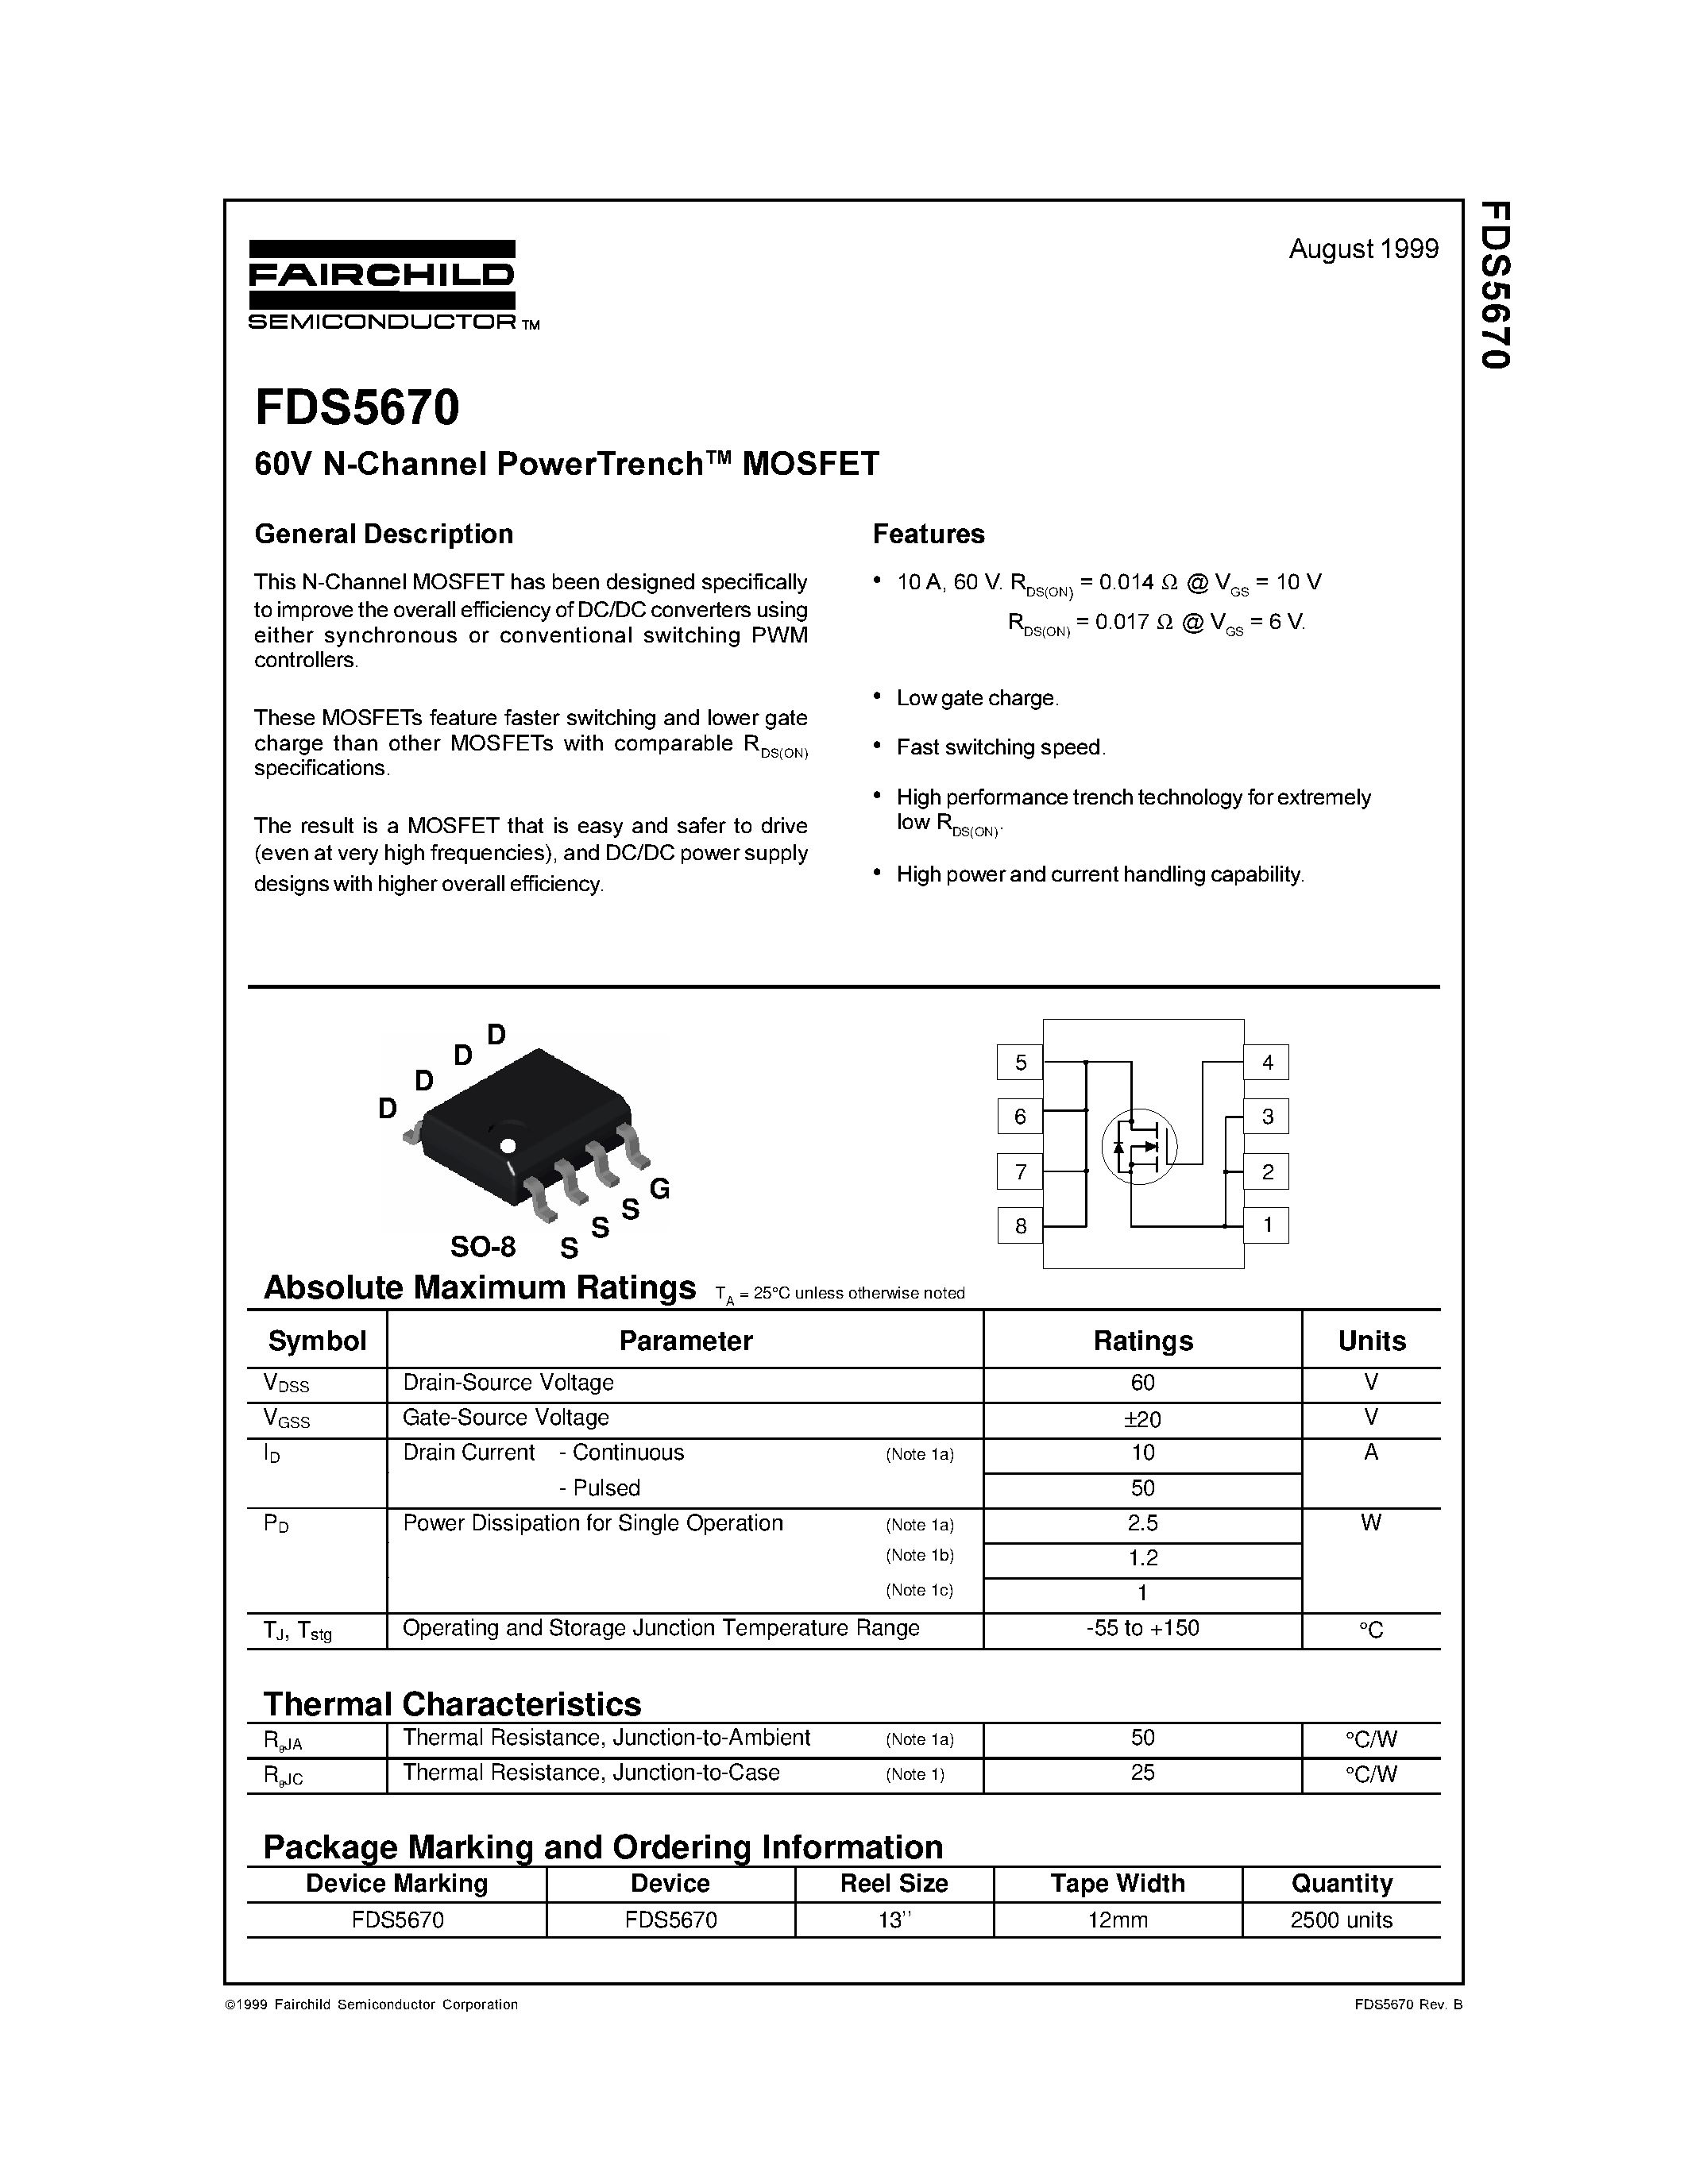 Даташит FDS5670 - 60V N-Channel PowerTrench MOSFET страница 1